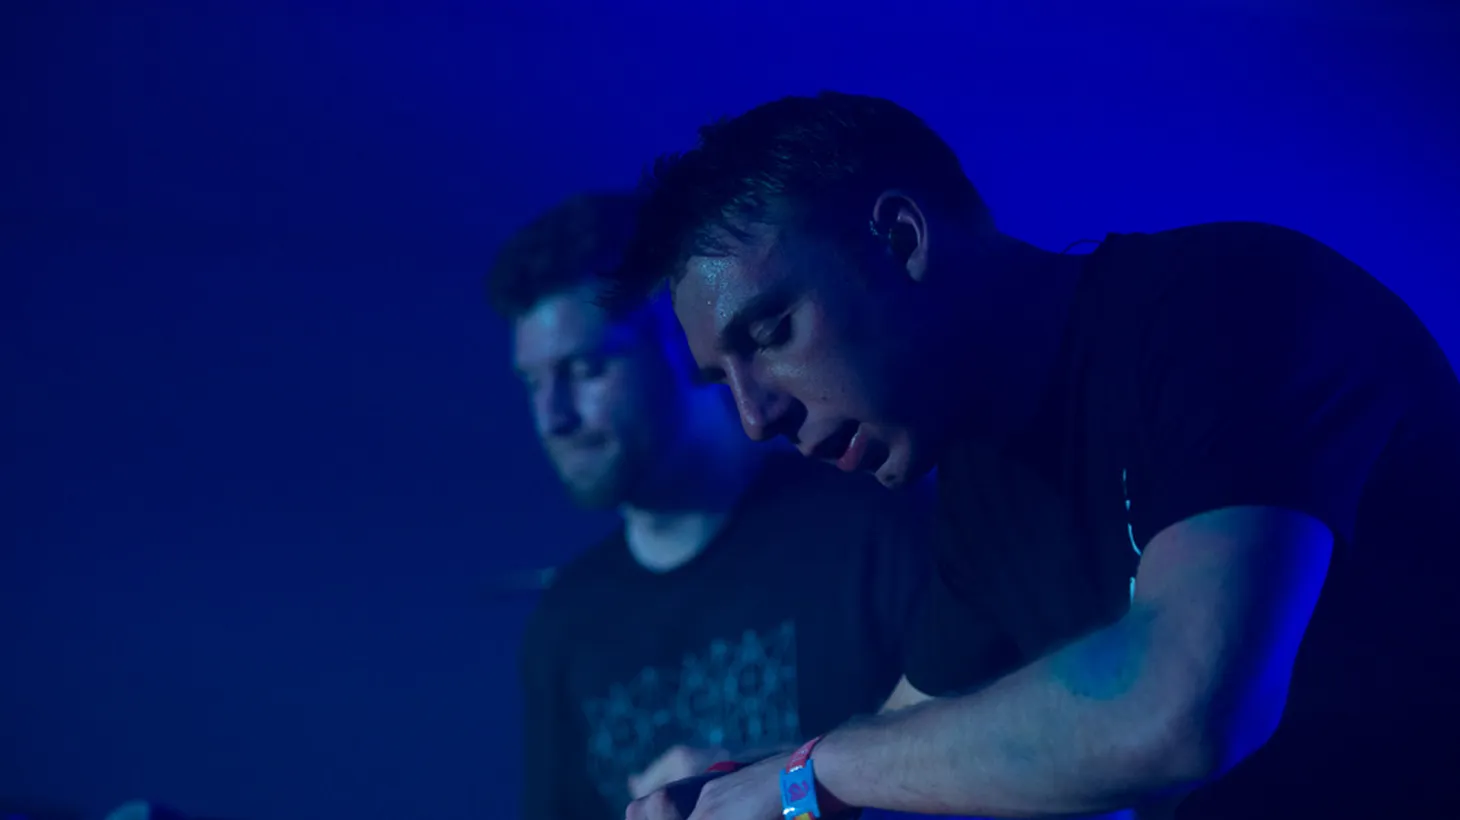 Seattle-based production duo Odesza are leading a new chapter in electronic music. Their focus on melodic, uplifting songs has made them a festival favorite.